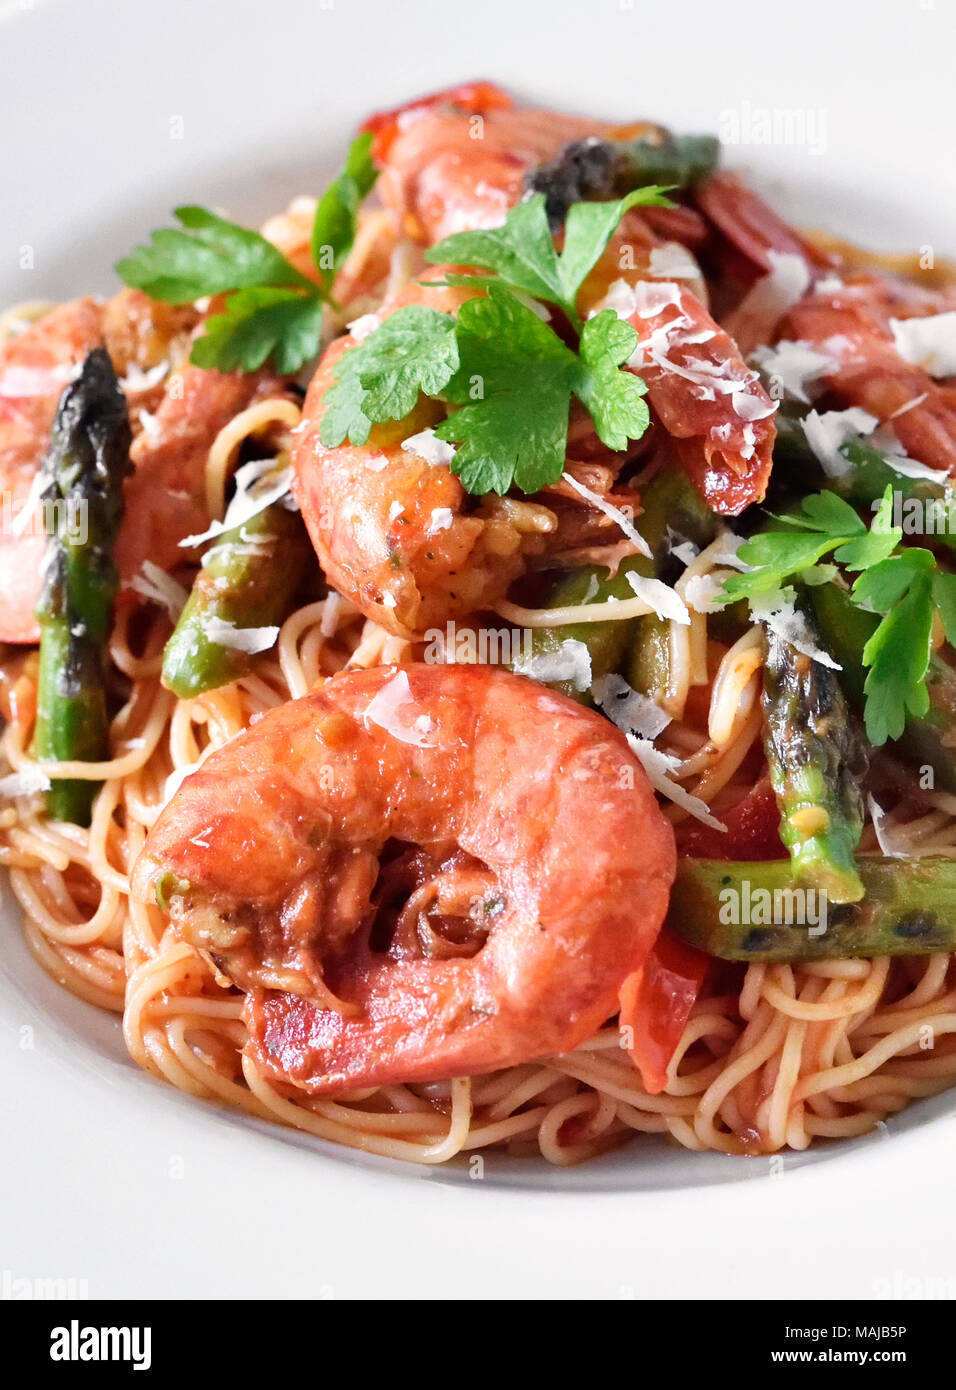 Spaghetti frutti di mare or pasta dish with shrimps and green asparagus and parsley garnish. White plate on a wooden table, healthy eating scene. Stock Photo